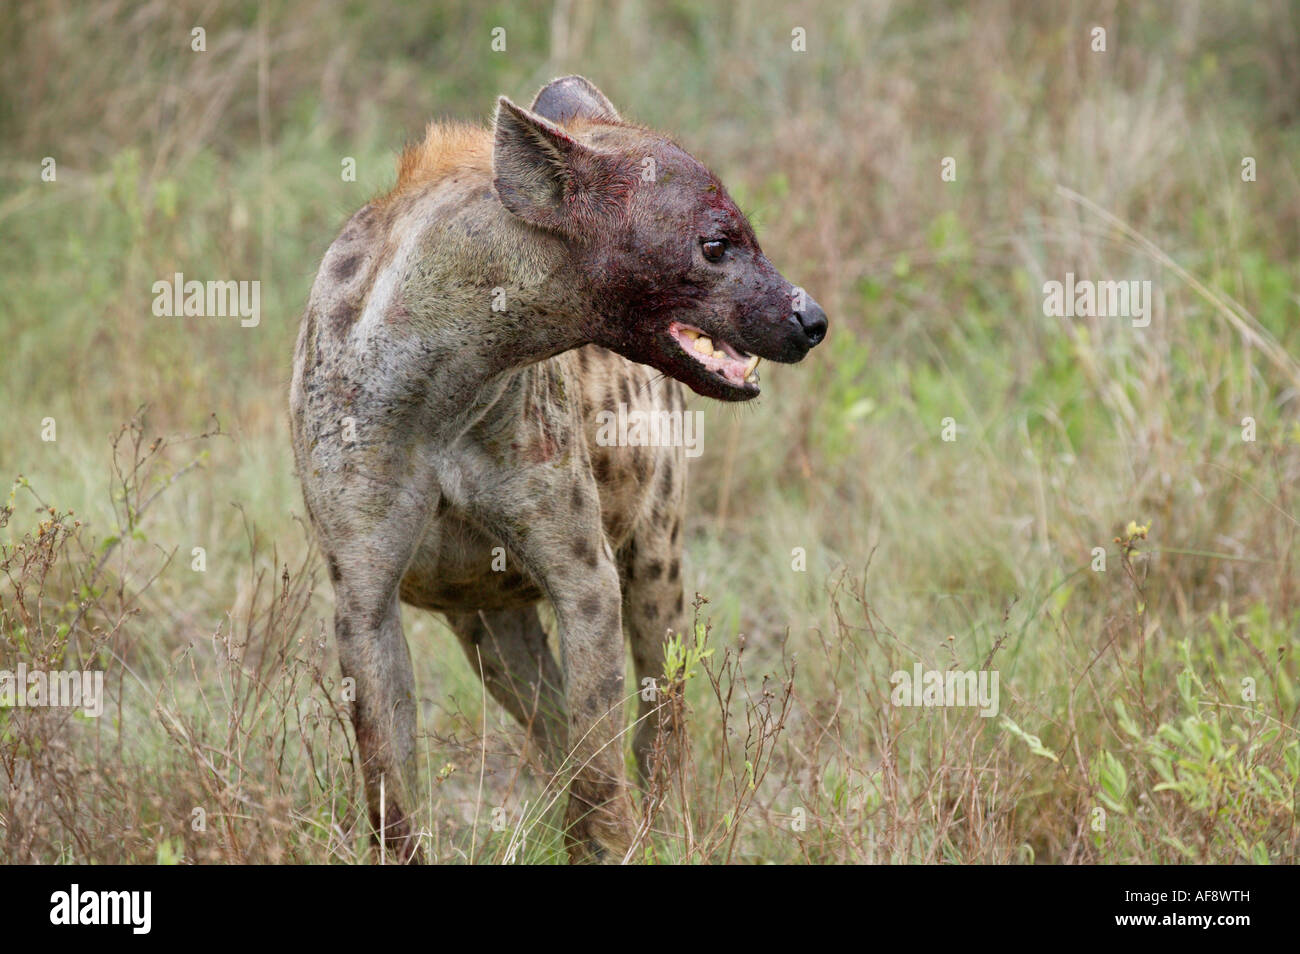 Spotted hyaena with a bloodied face Stock Photo